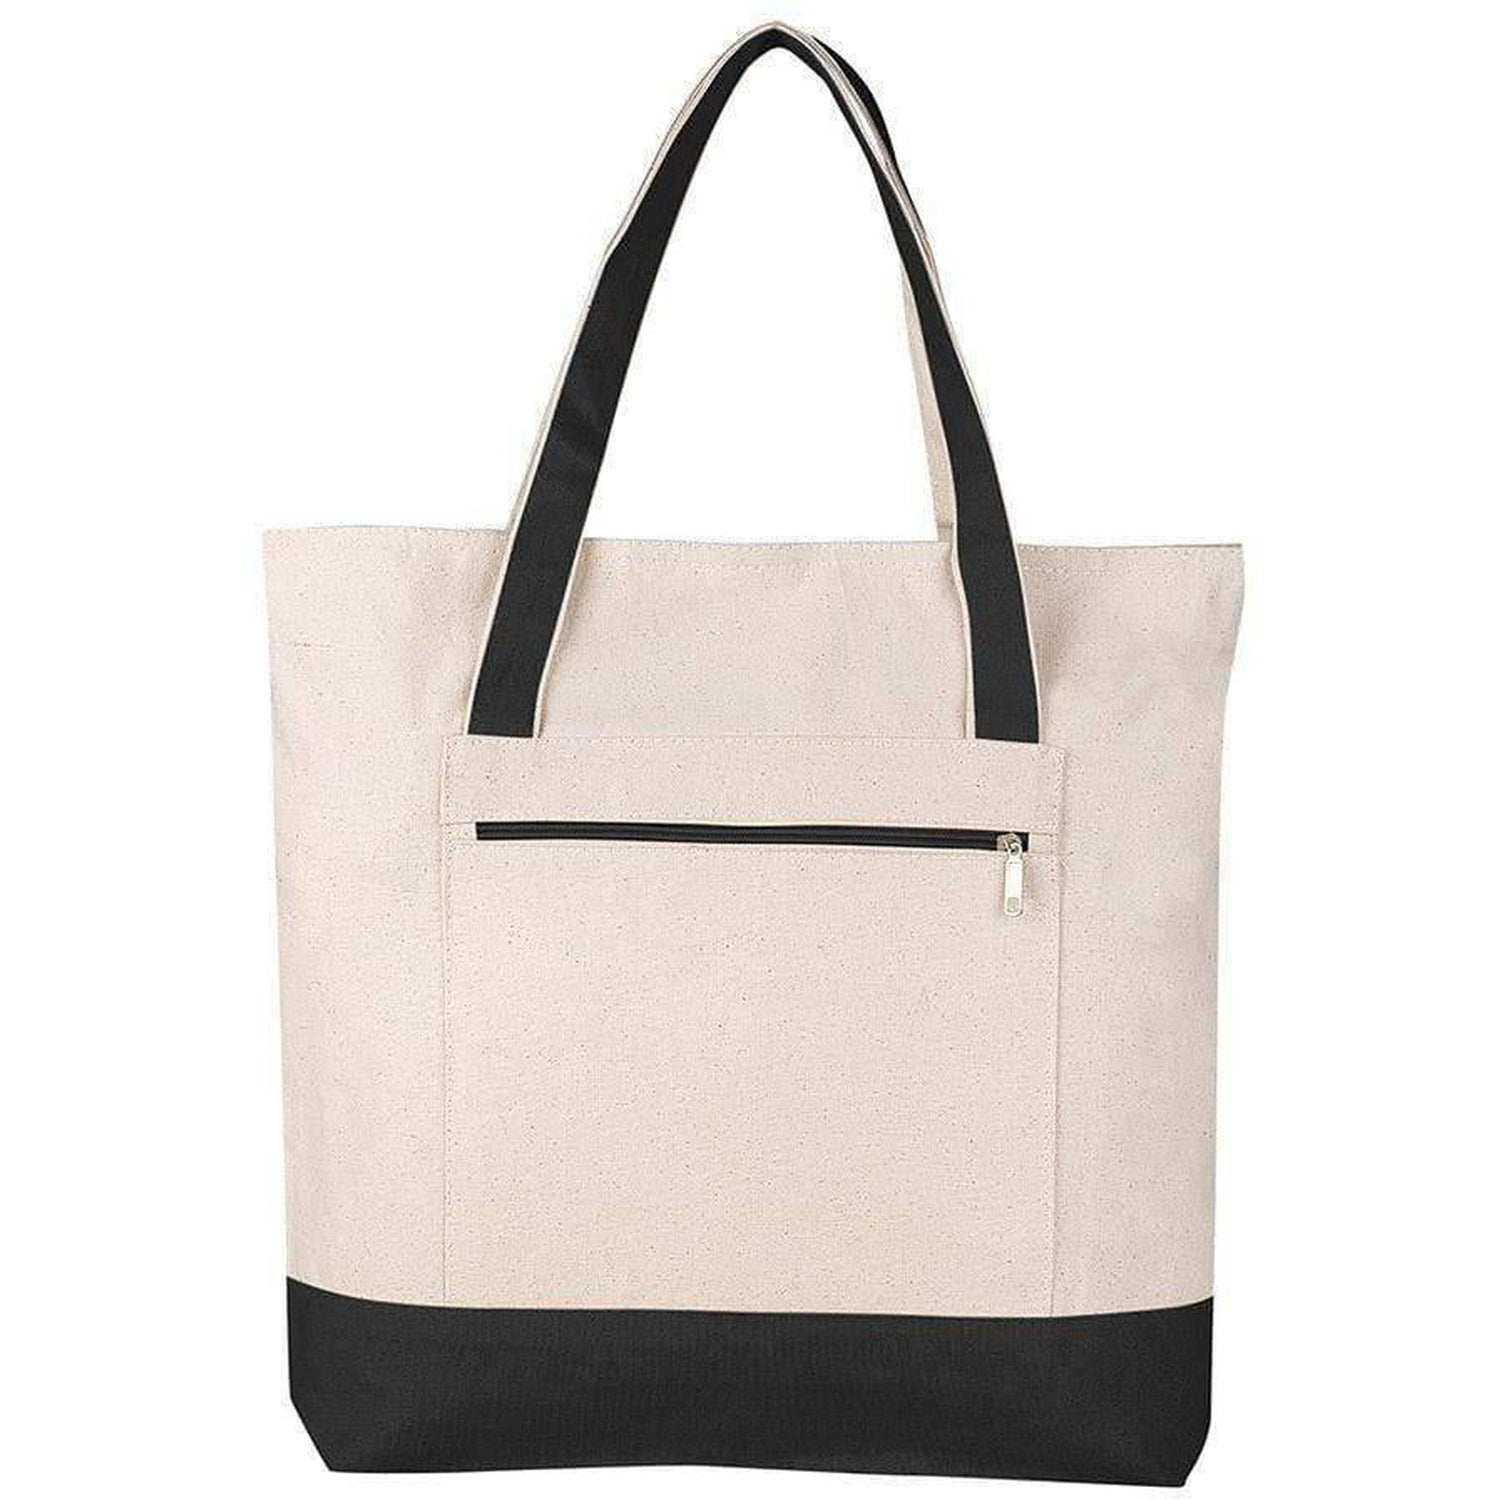 Canvas Tote Bags with Zipper & Wholesale Large Canvas Tote Bags ...